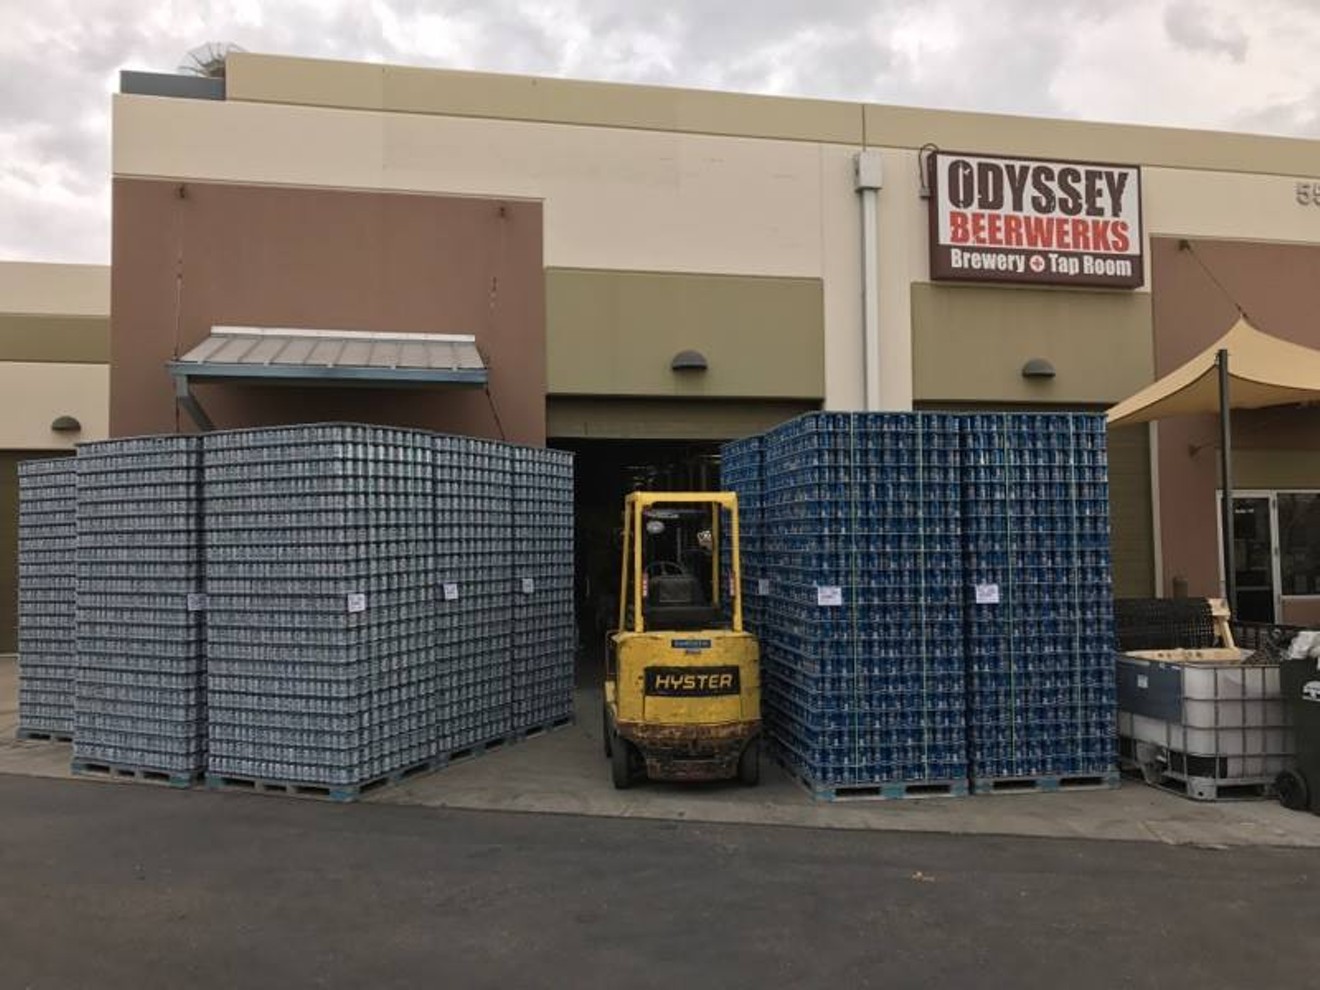 Odyssey Beerworks began canning a new IPA last year.